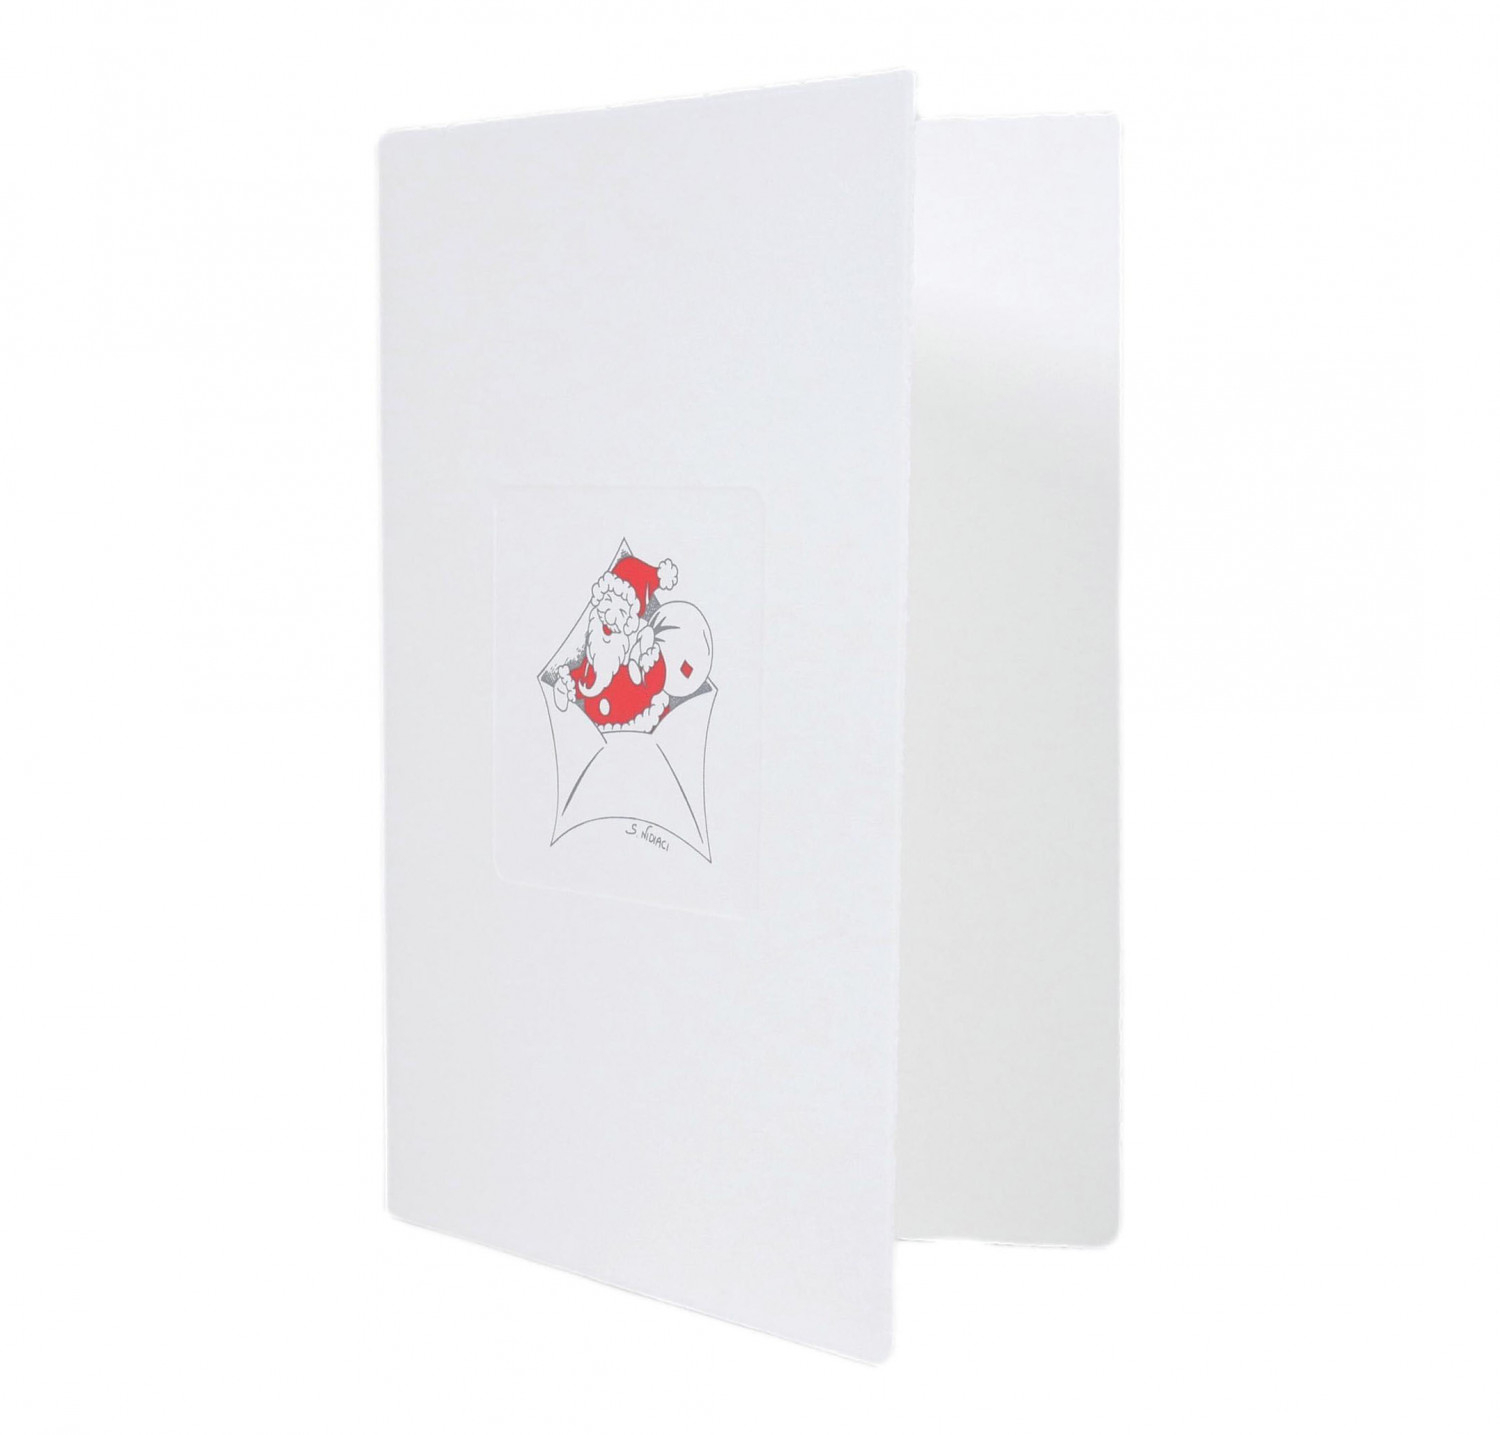 BGL+BST BABBO NATALE ROSSO-BIANCO-DONI